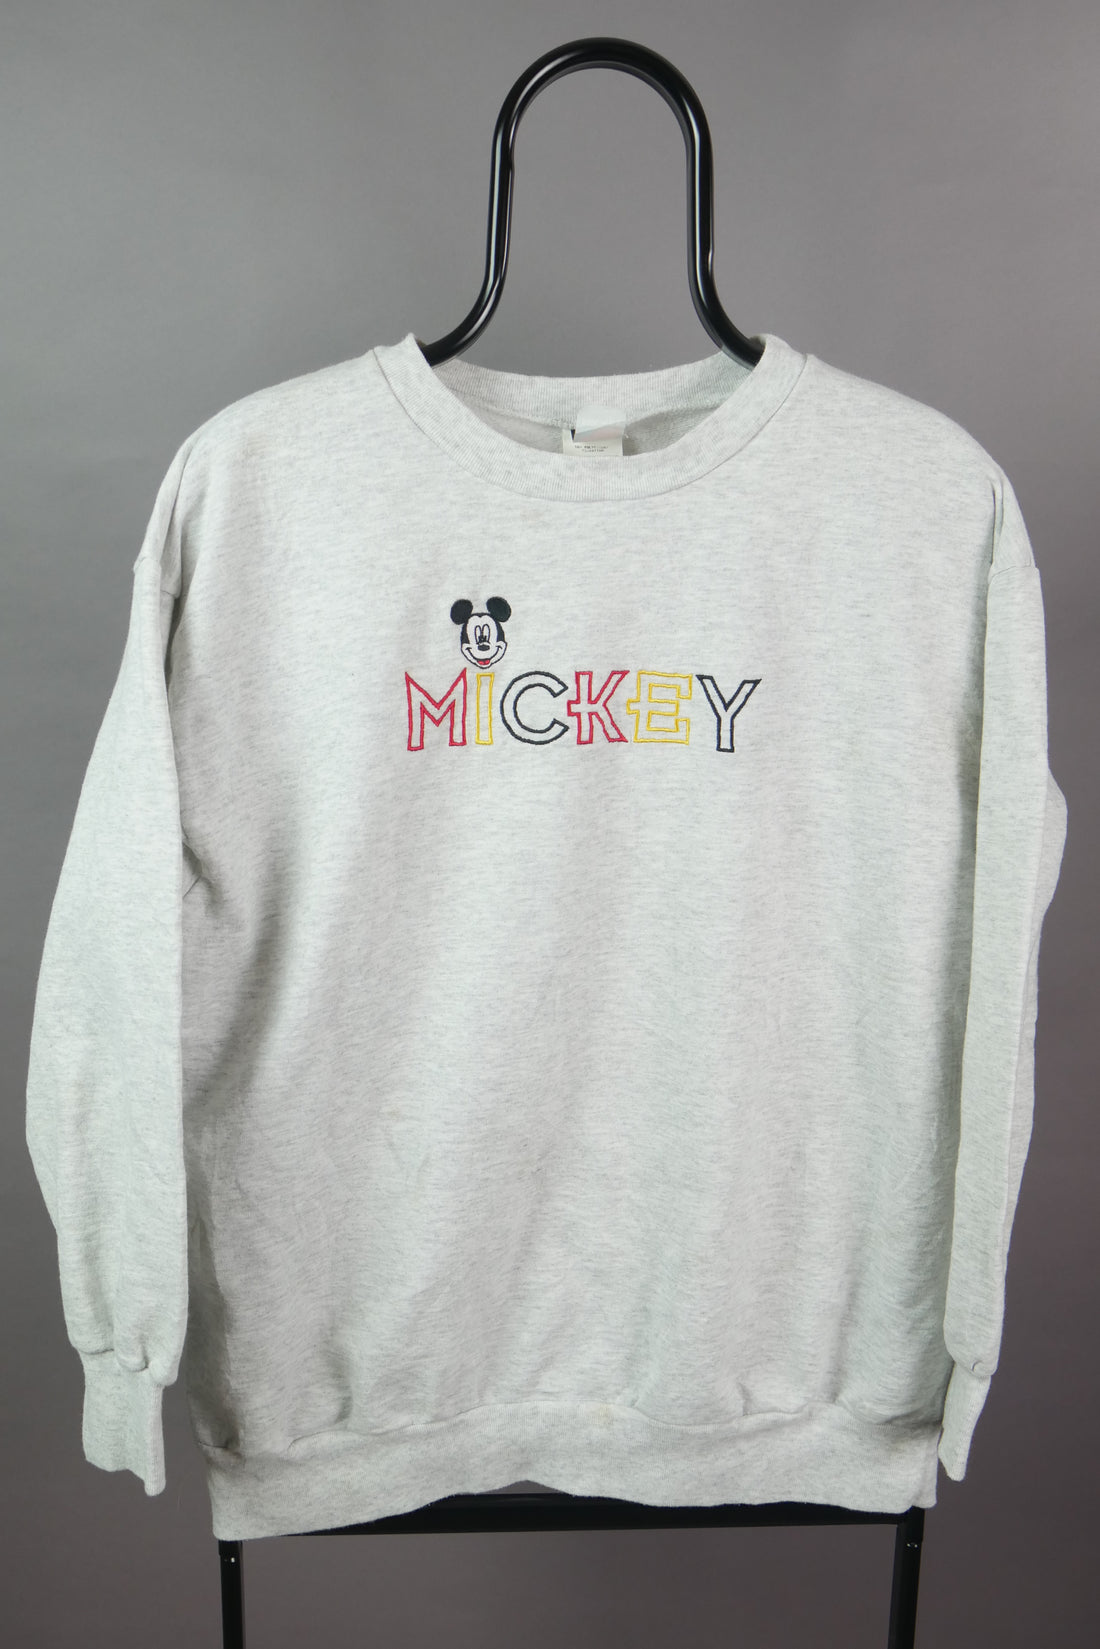 The Vintage Mickey Sweater (M)